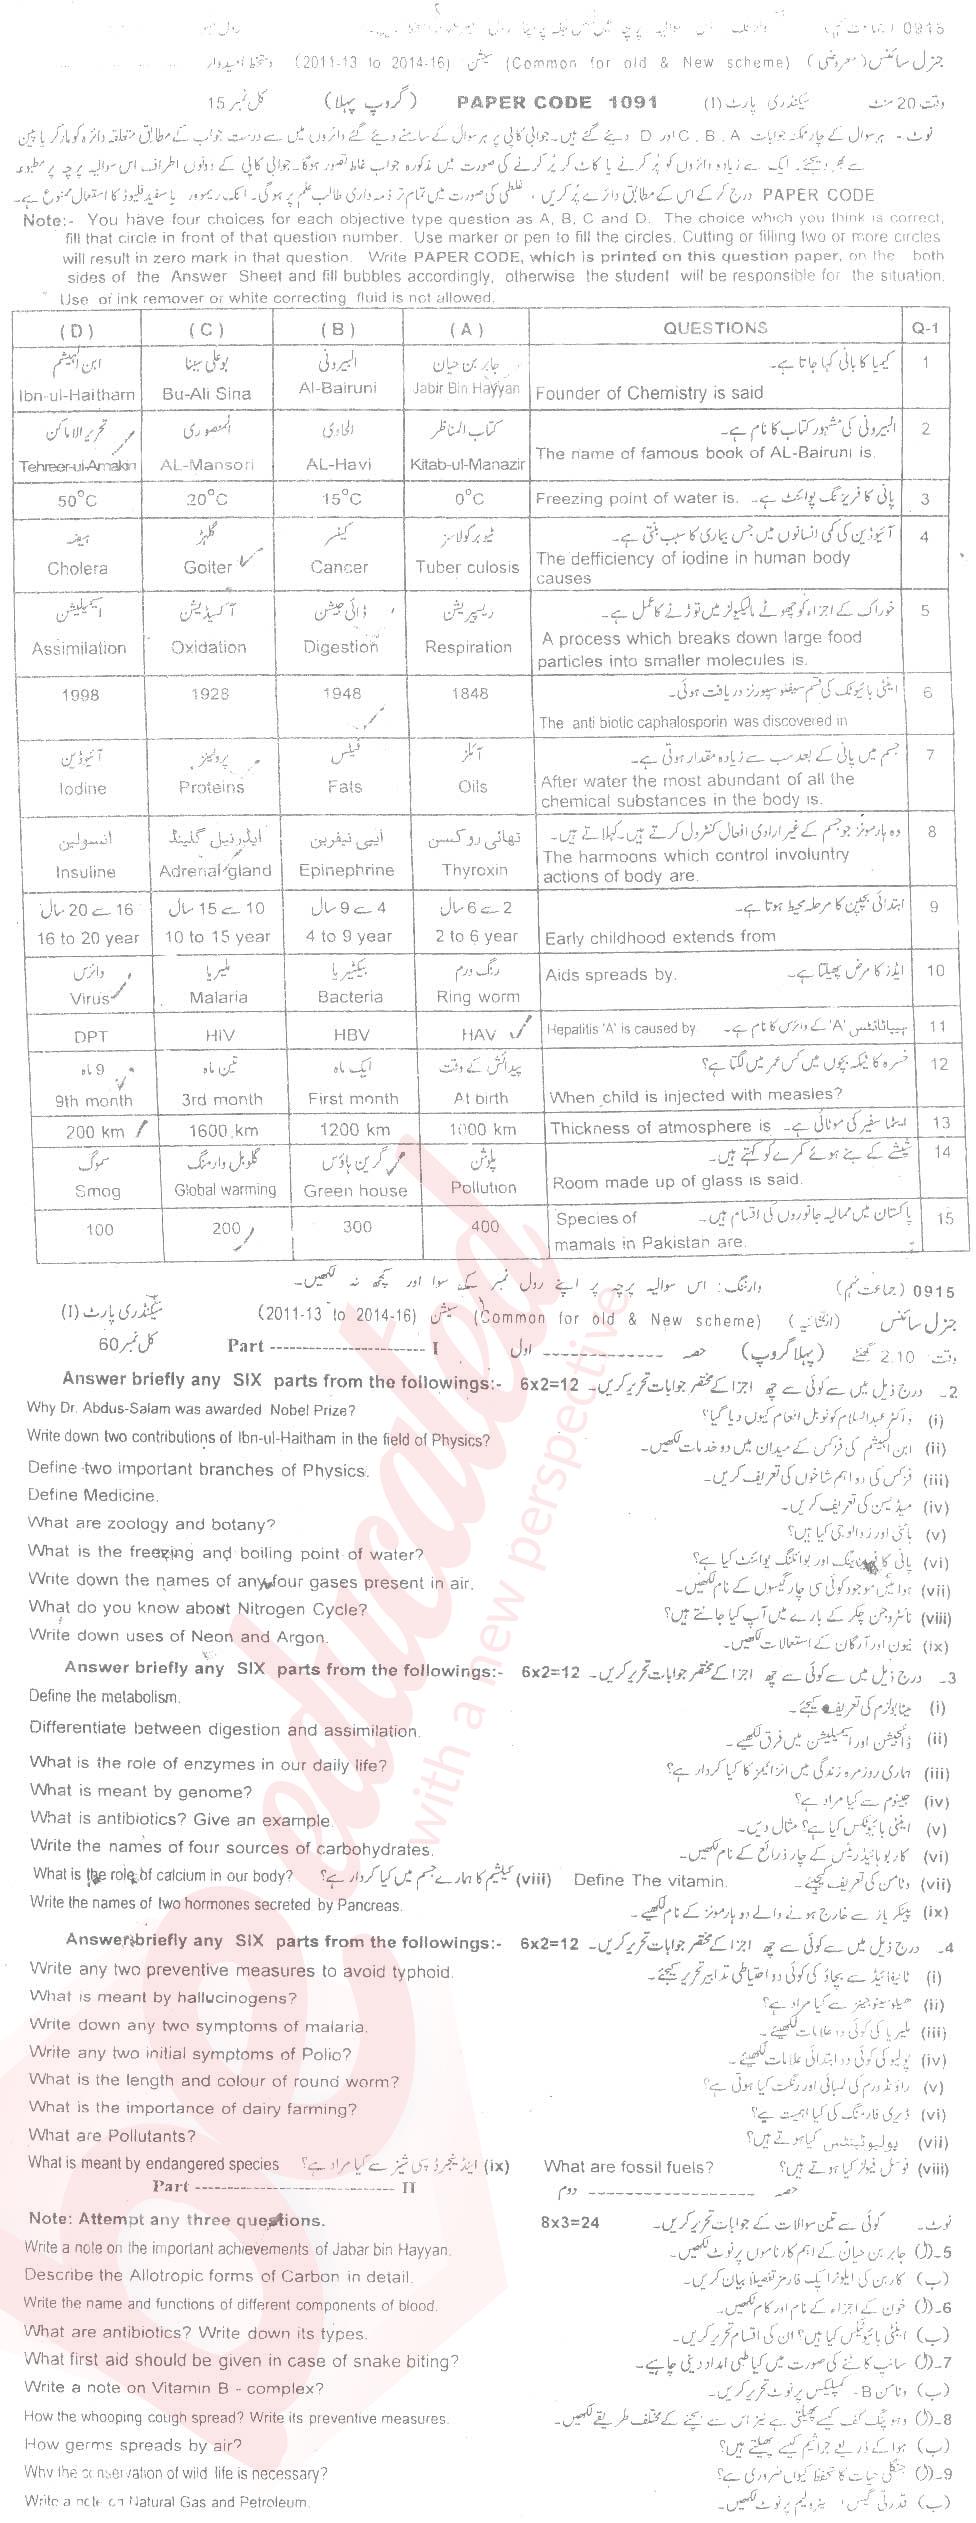 General Science 9th class Past Paper Group 1 BISE Sargodha 2015